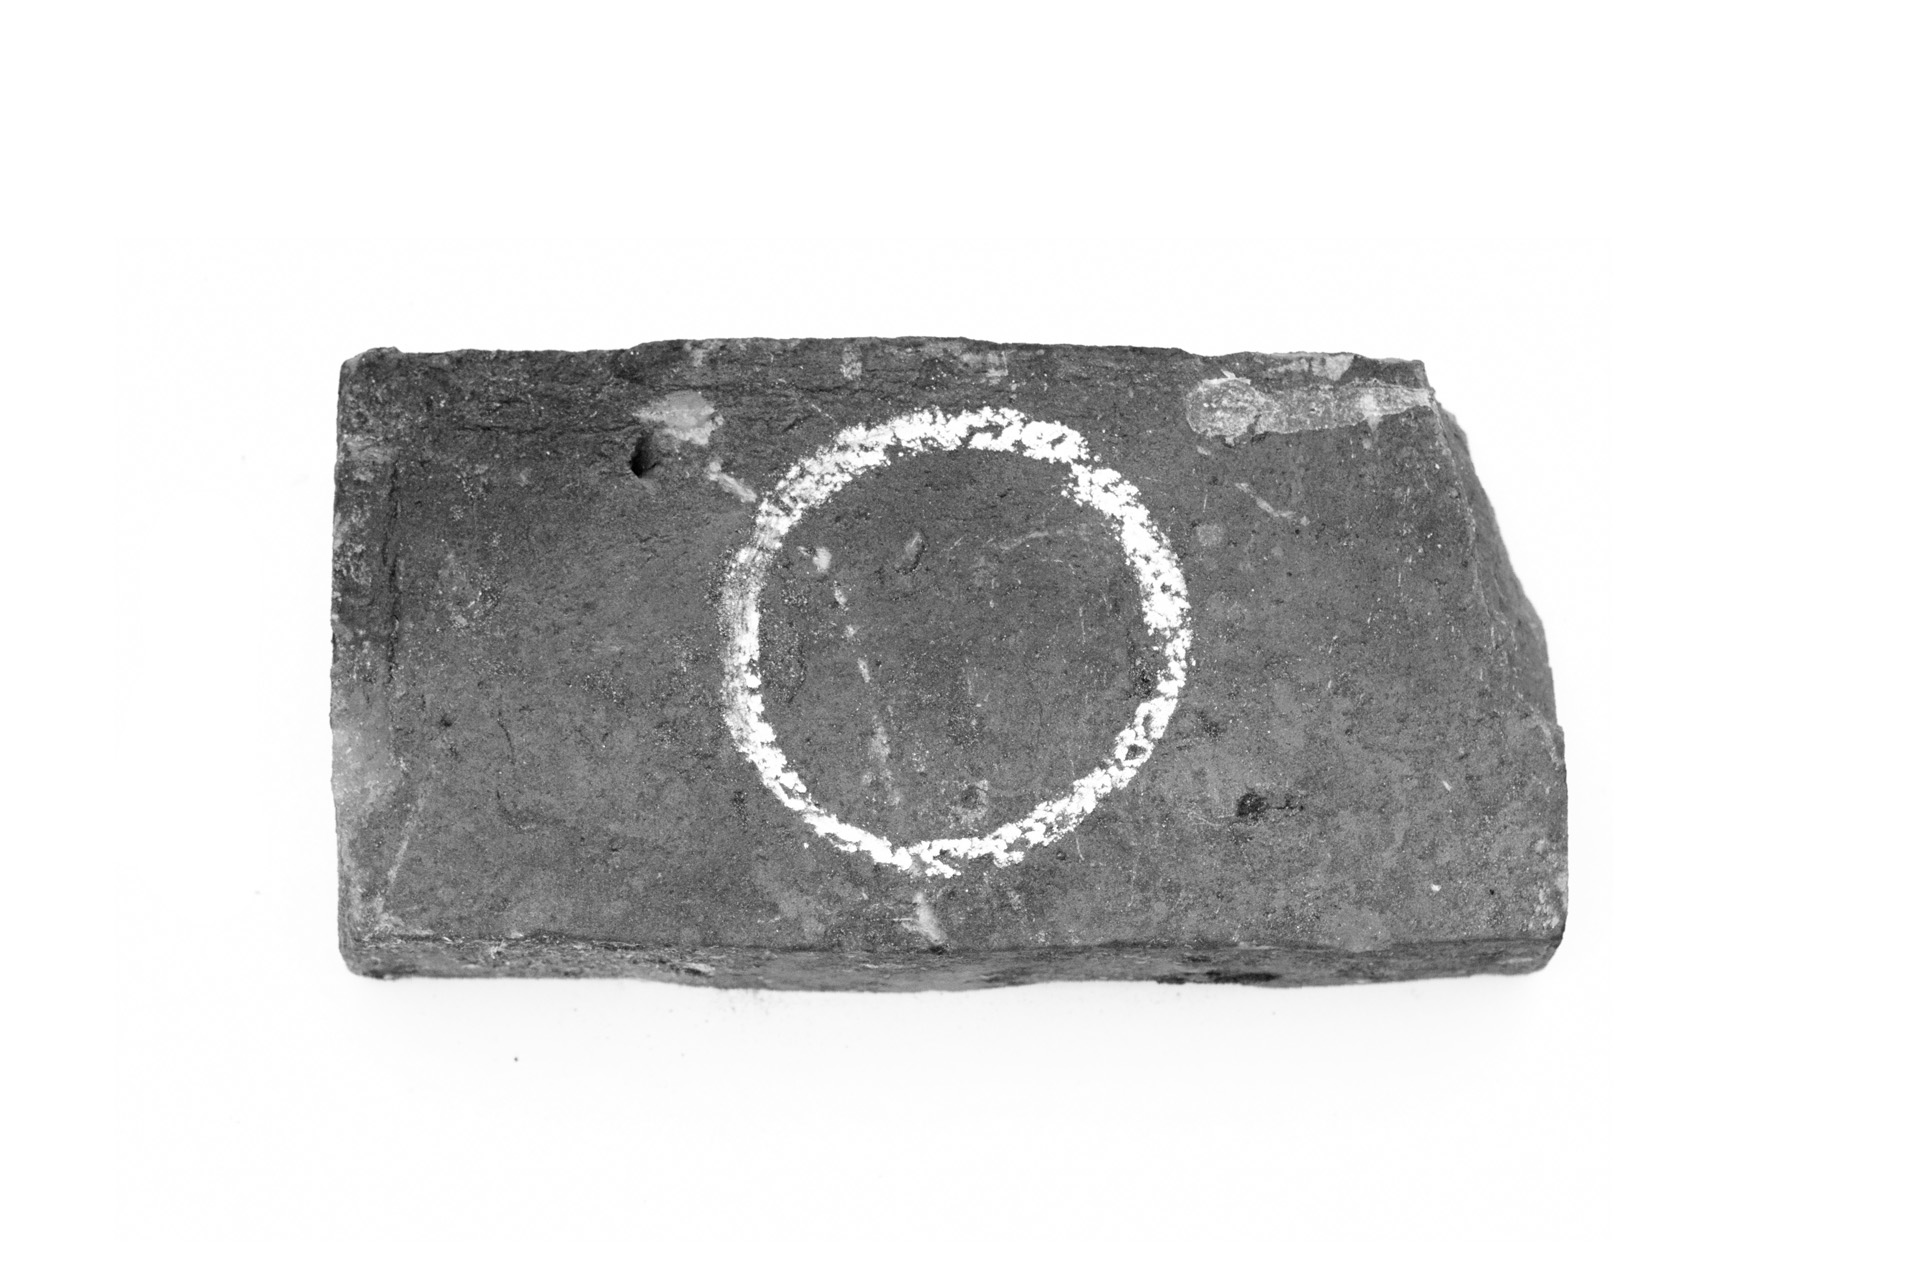 circle drawn with plaster